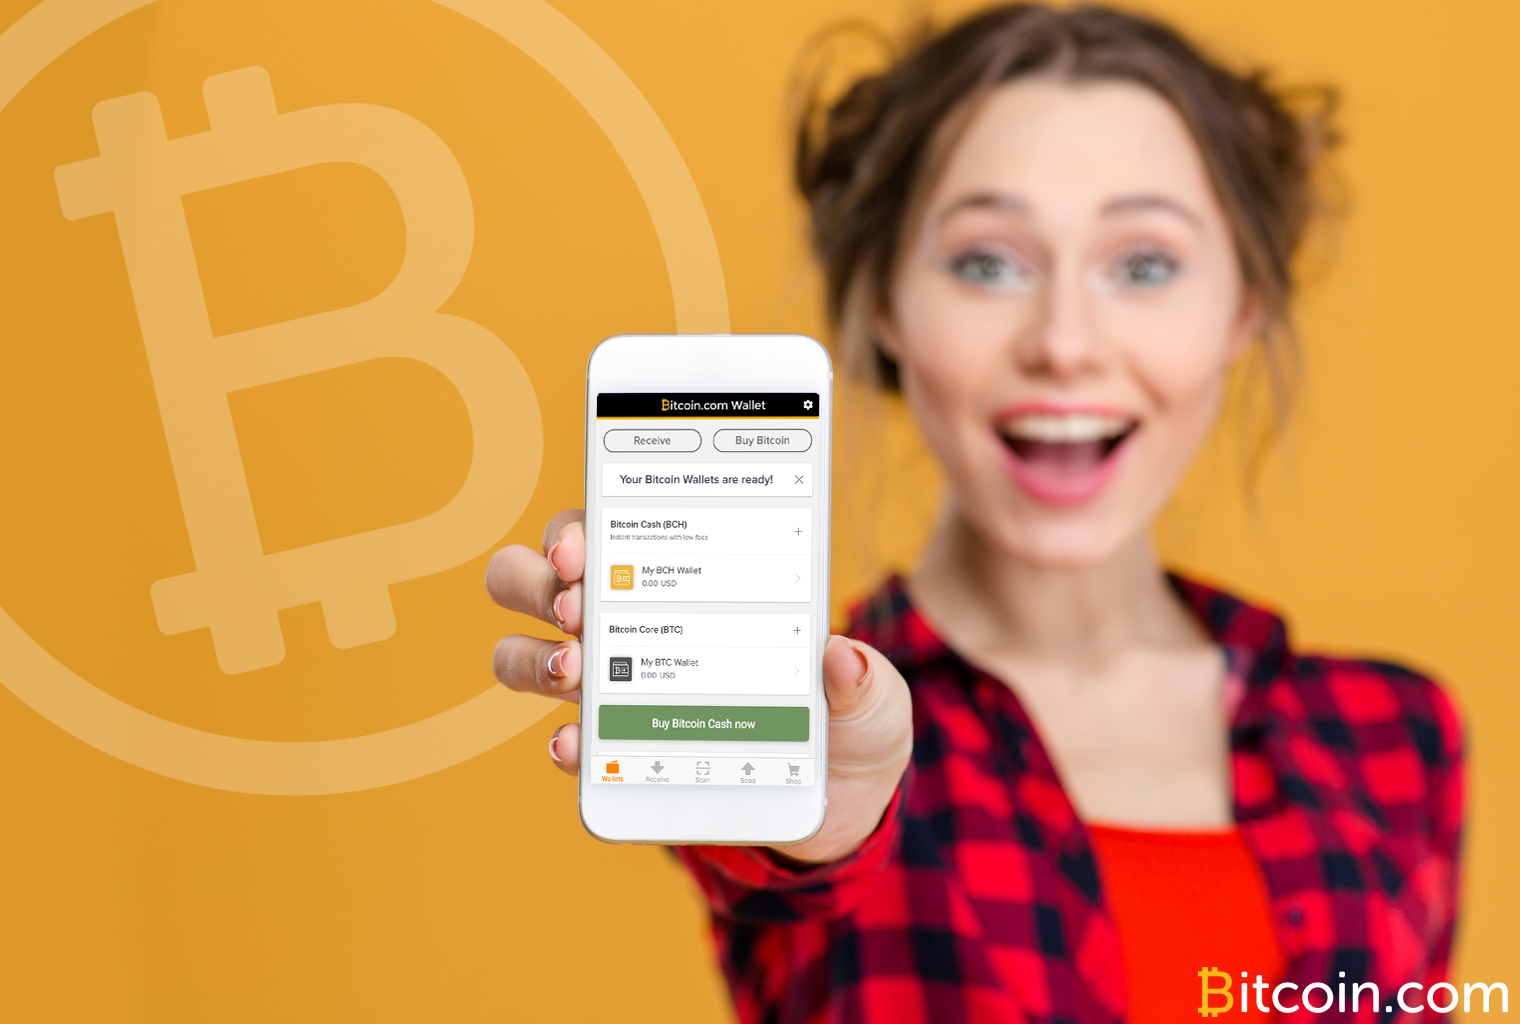 Uk And Europe Based Users Can Now Buy Bitcoin Cash Inside The - 